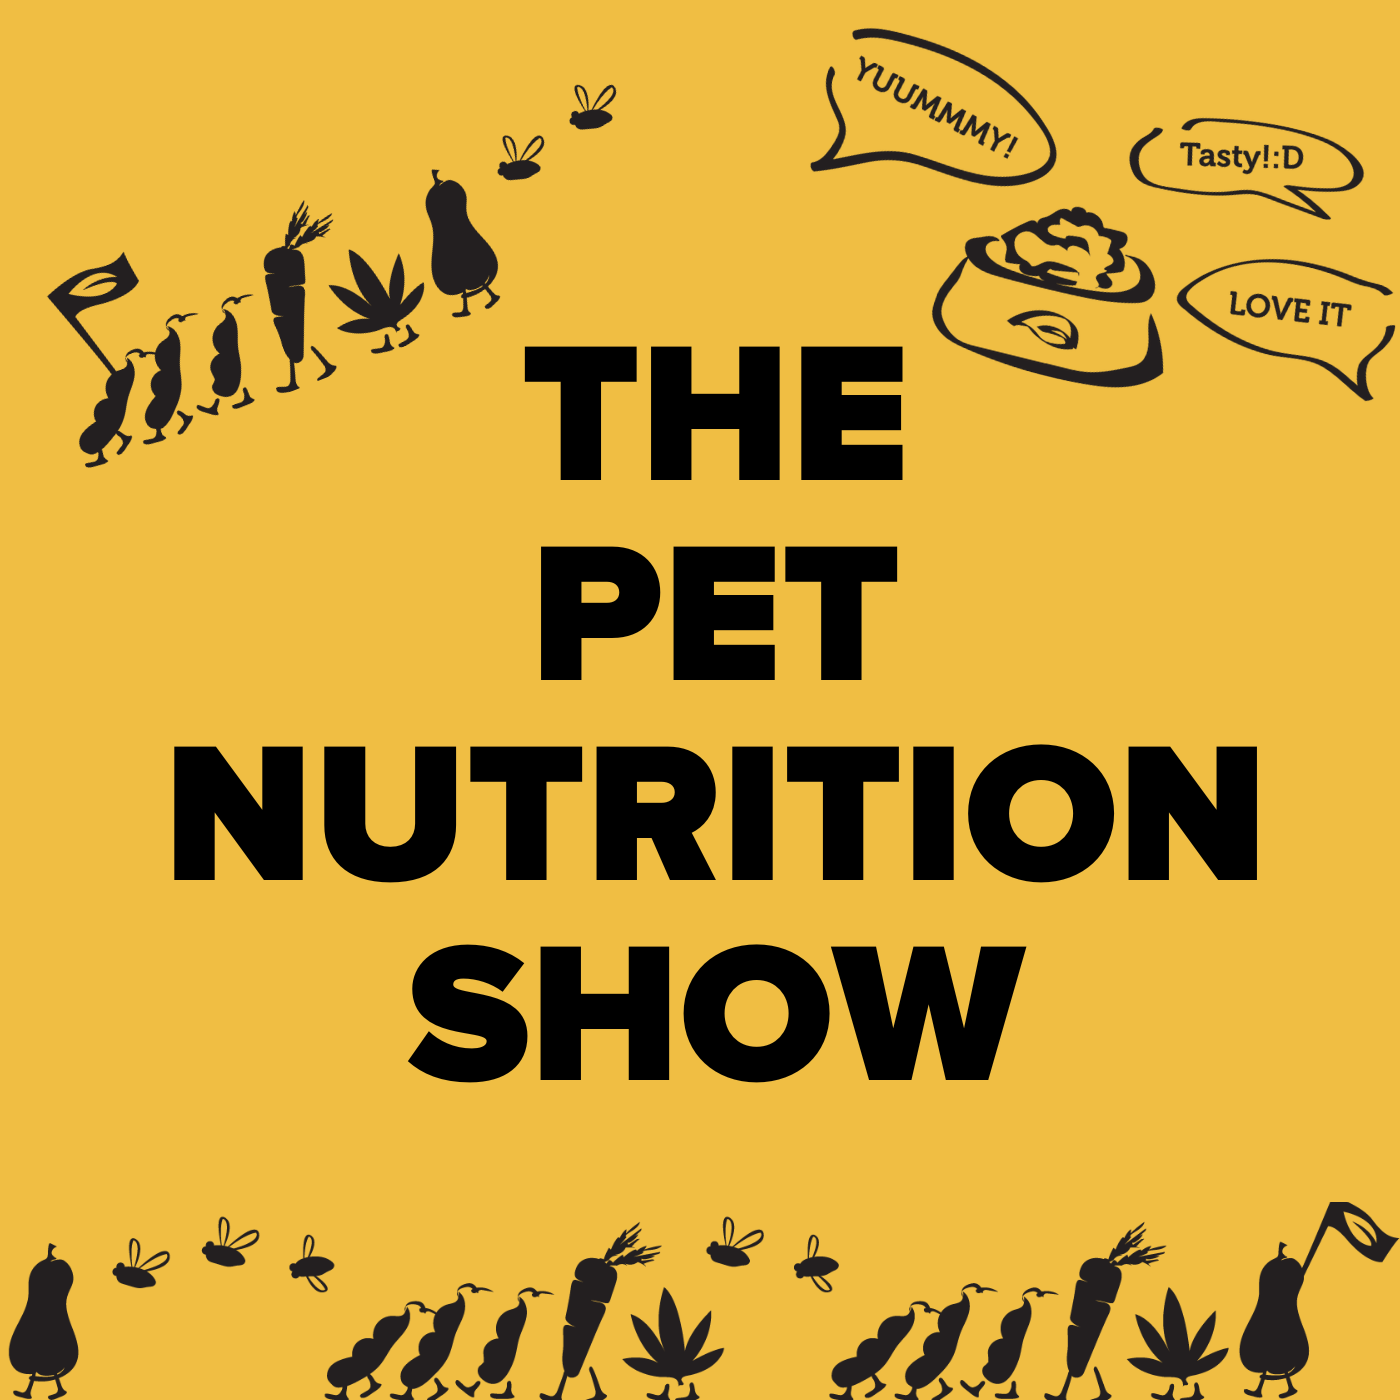 High Protein, Low Carb: The Diet Pets Crave?